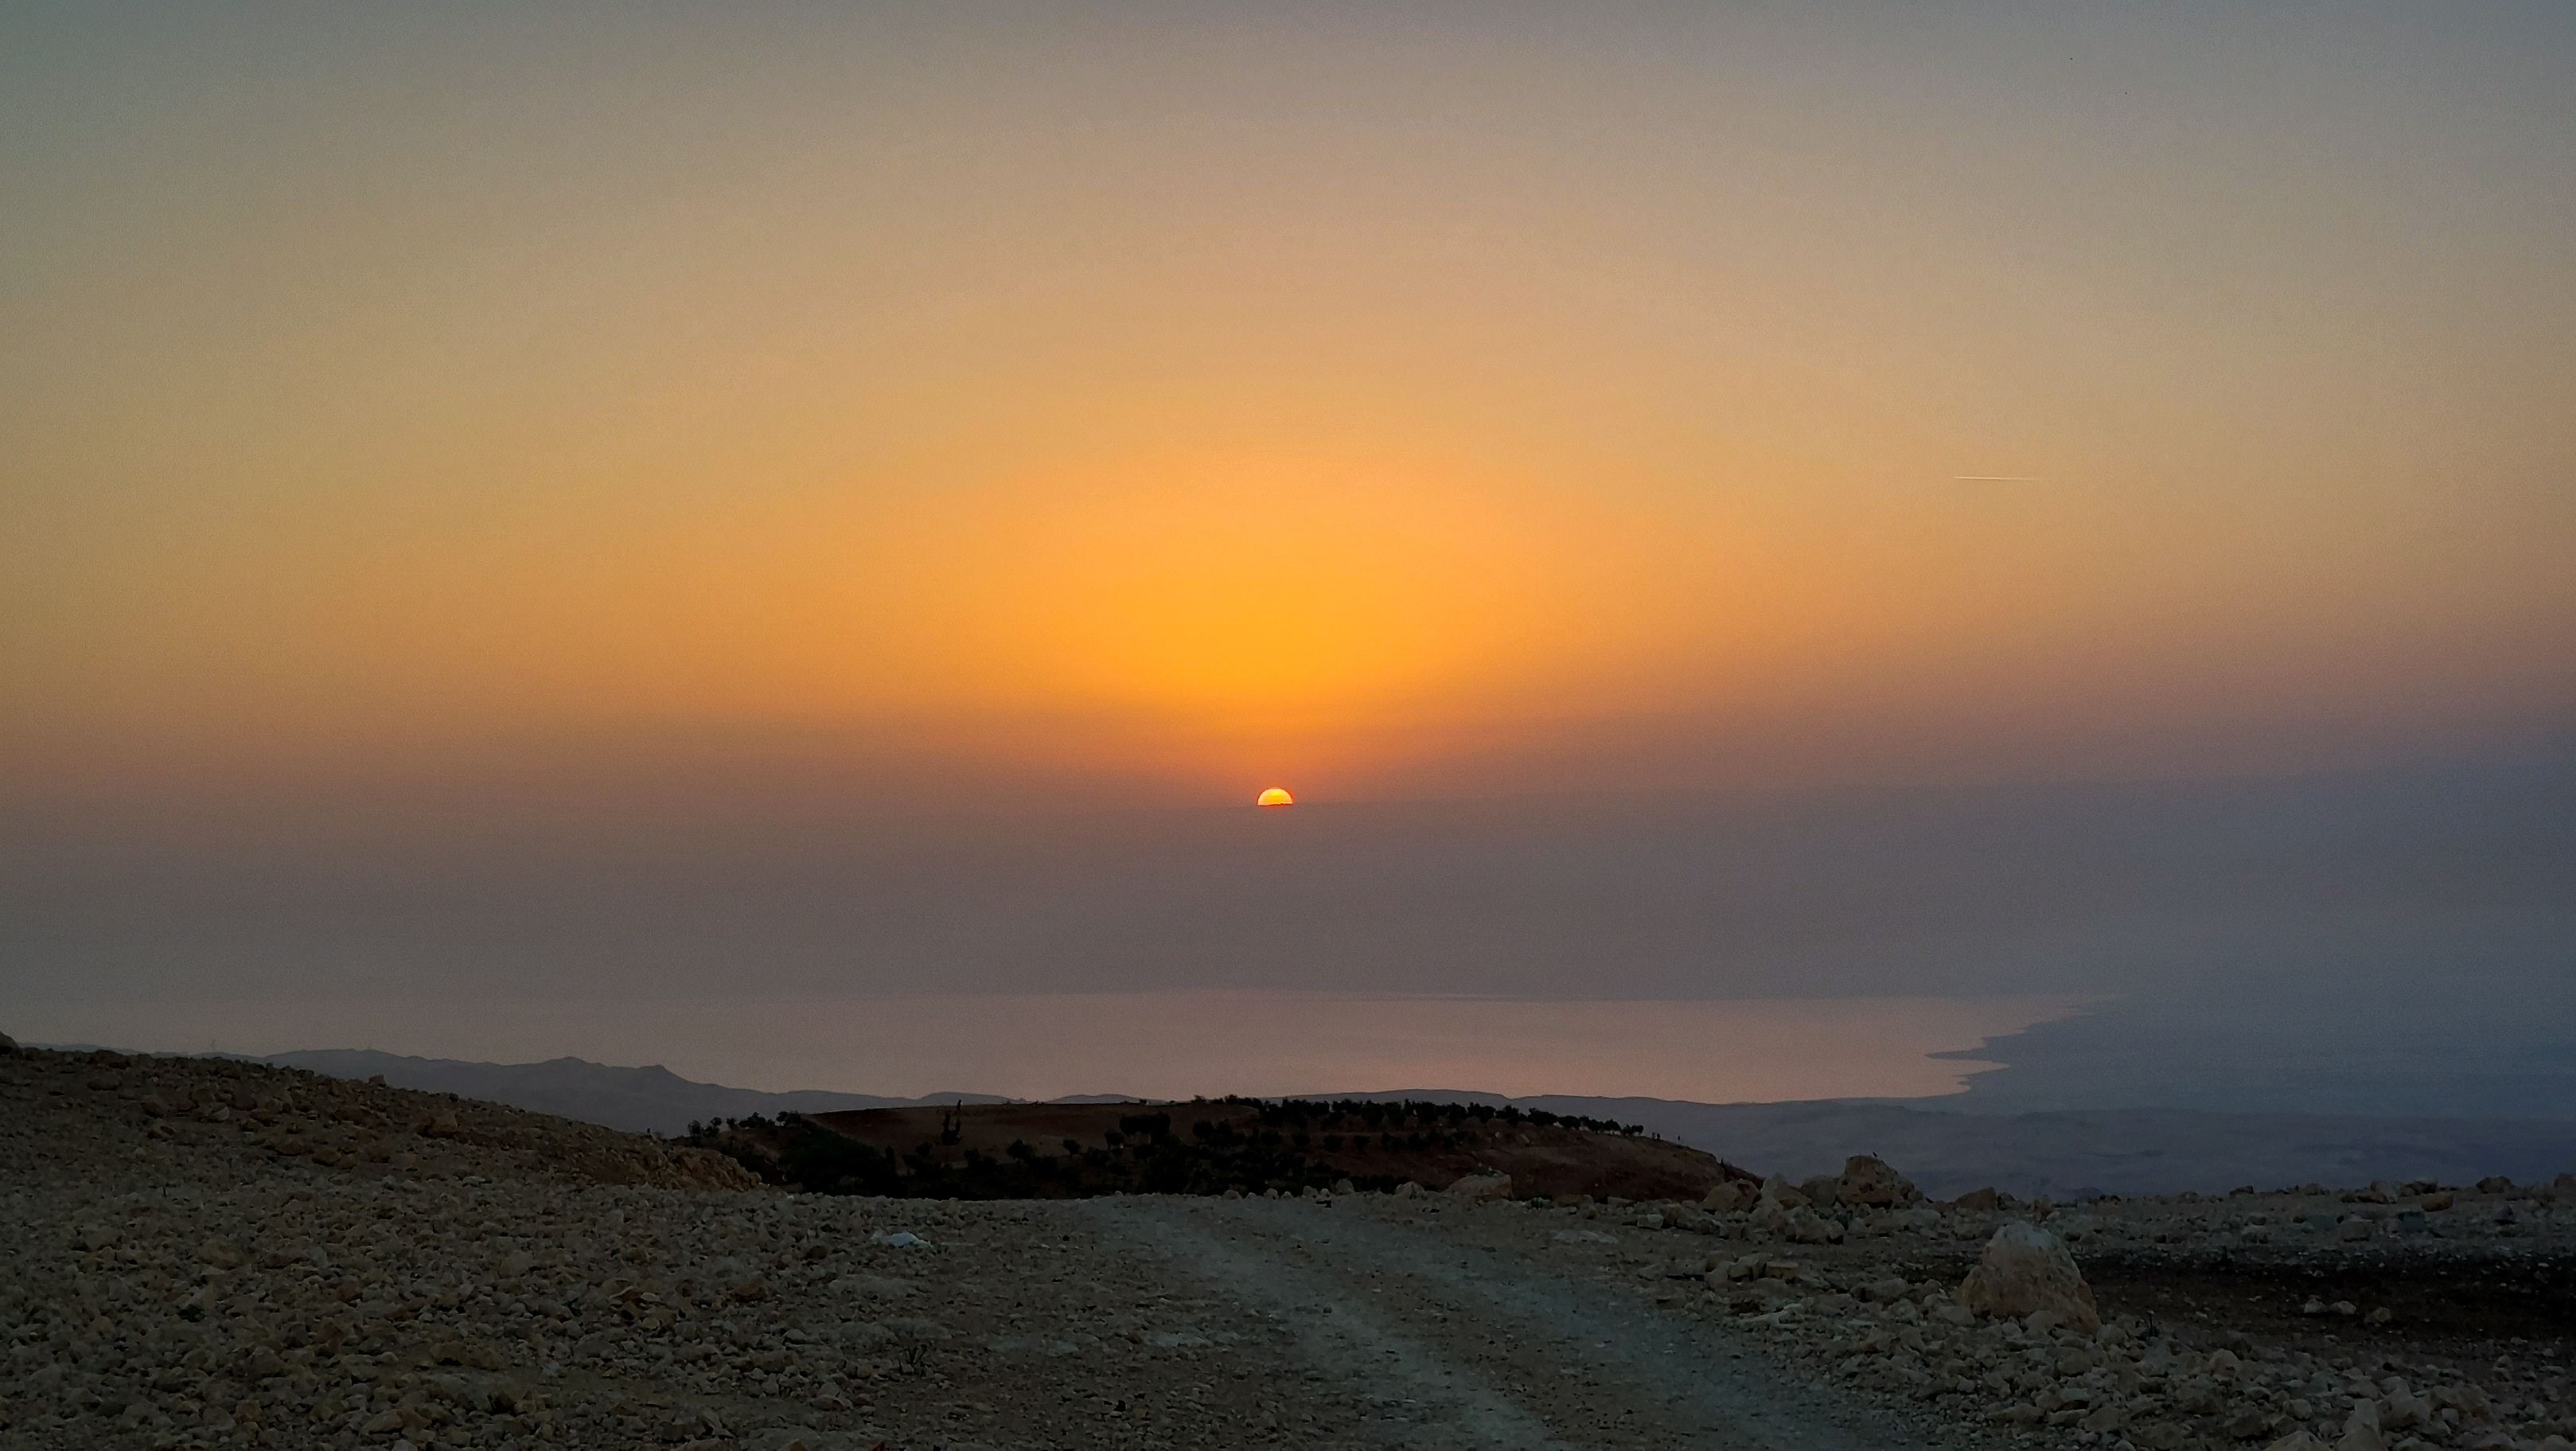 <span  class="uc_style_uc_tiles_grid_image_elementor_uc_items_attribute_title" style="color:#ffffff;">Sunset over the Dead Sea</span>